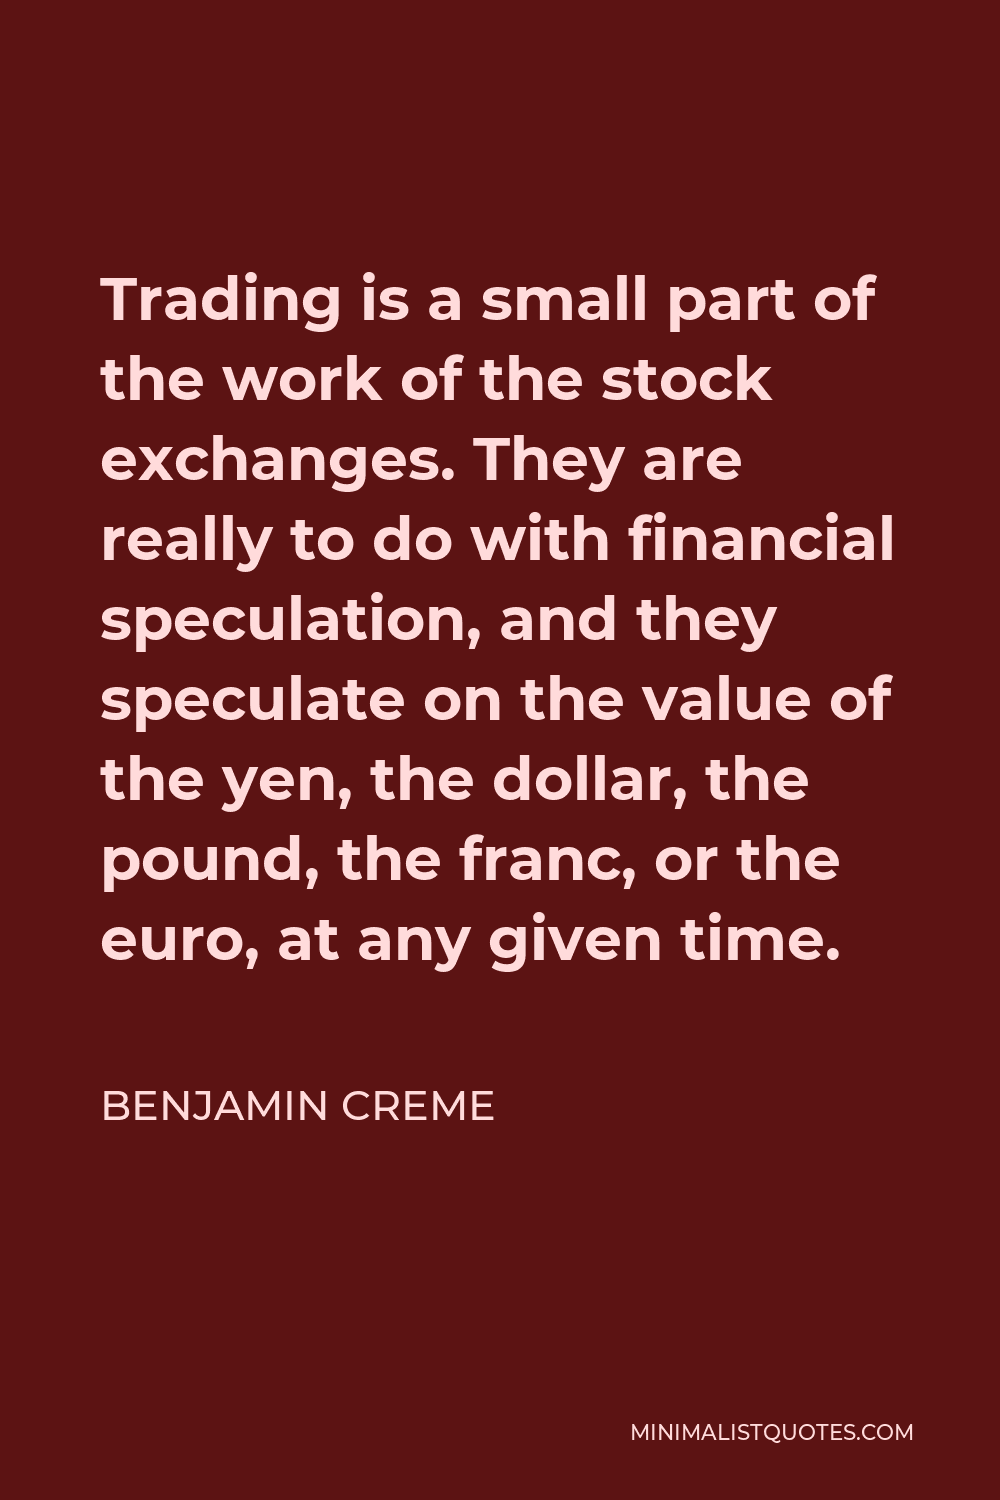 Benjamin Creme Quote - Trading is a small part of the work of the stock exchanges. They are really to do with financial speculation, and they speculate on the value of the yen, the dollar, the pound, the franc, or the euro, at any given time.